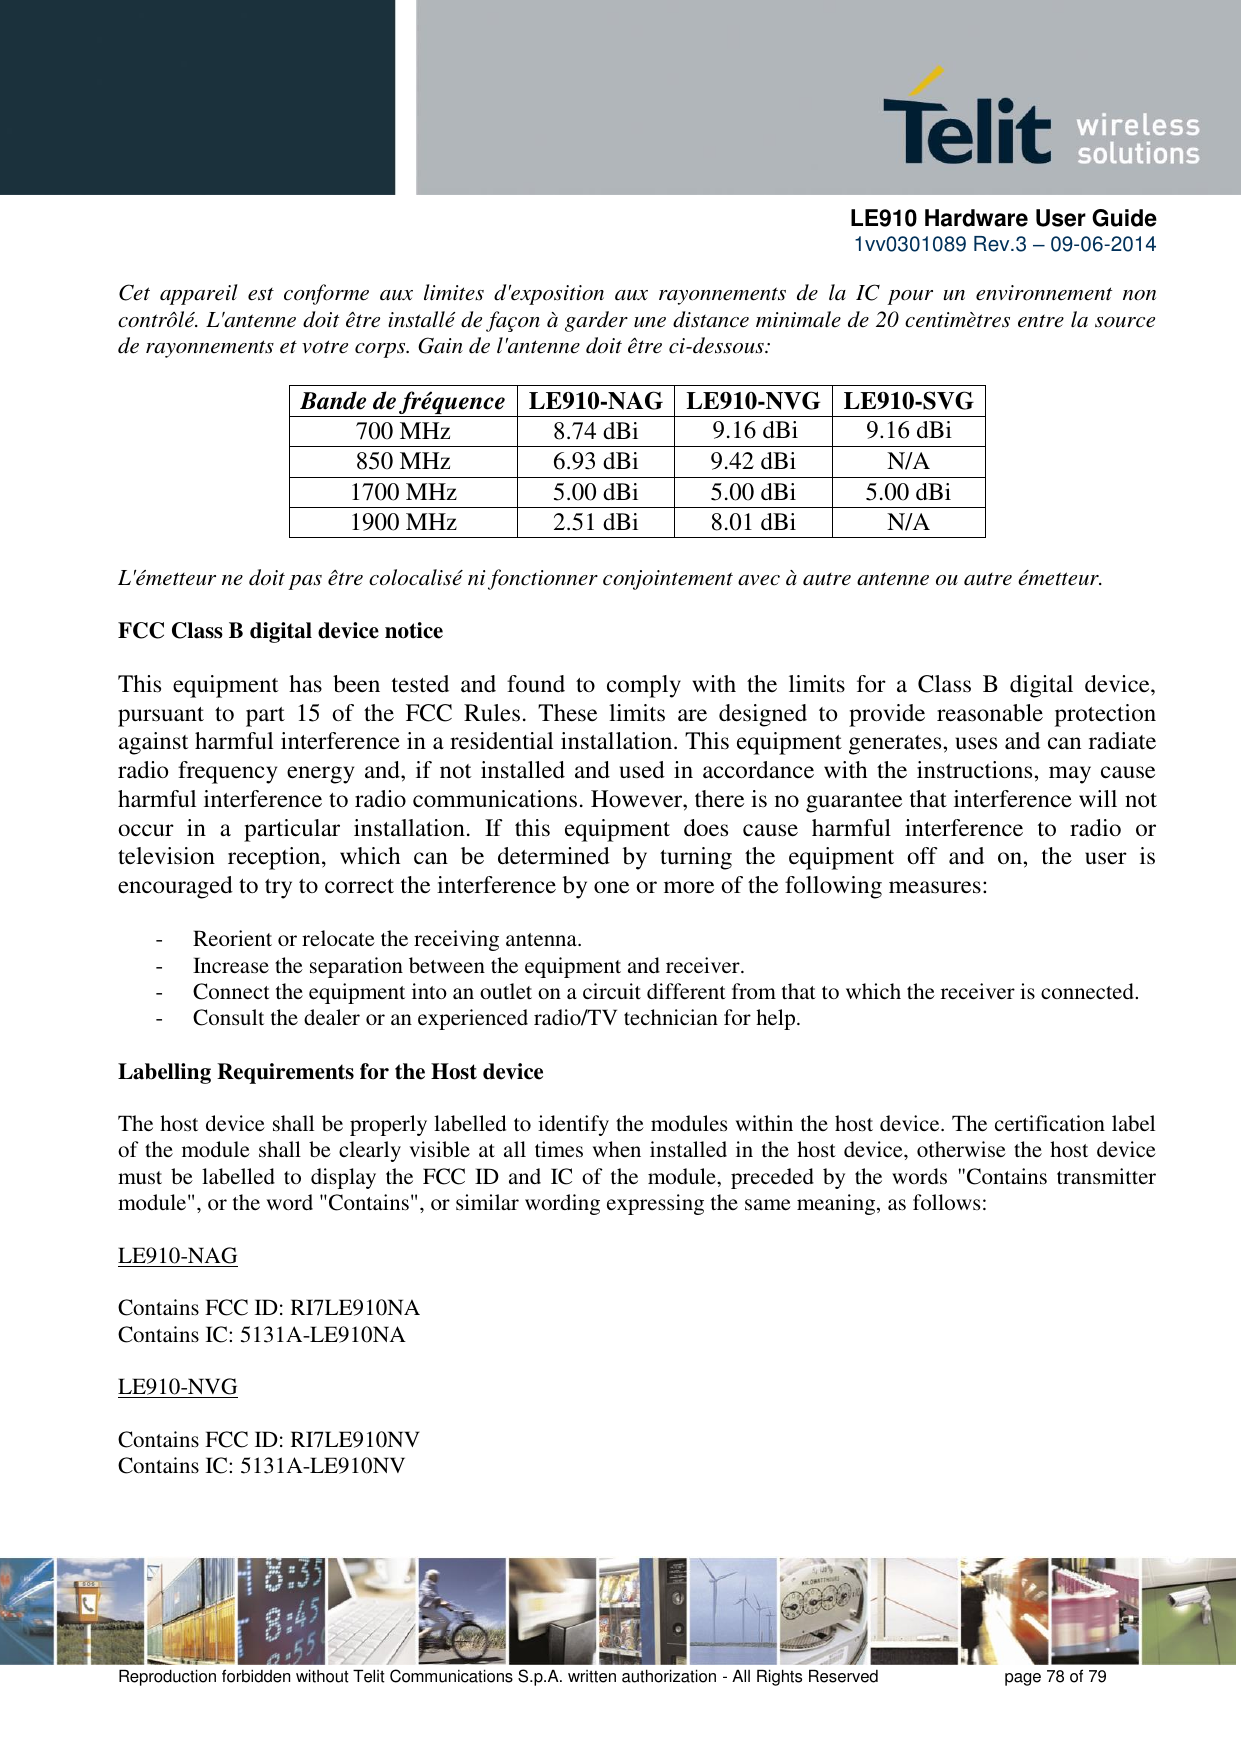      LE910 Hardware User Guide 1vv0301089 Rev.3 – 09-06-2014    Reproduction forbidden without Telit Communications S.p.A. written authorization - All Rights Reserved    page 78 of 79  Cet  appareil  est  conforme  aux  limites  d&apos;exposition  aux  rayonnements  de  la  IC  pour  un  environnement  non contrôlé. L&apos;antenne doit être installé de façon à garder une distance minimale de 20 centimètres entre la source de rayonnements et votre corps. Gain de l&apos;antenne doit être ci-dessous:  Bande de fréquence LE910-NAG LE910-NVG LE910-SVG 700 MHz 8.74 dBi   850 MHz 6.93 dBi 9.42 dBi N/A 1700 MHz 5.00 dBi 5.00 dBi 5.00 dBi 1900 MHz 2.51 dBi 8.01 dBi N/A  L&apos;émetteur ne doit pas être colocalisé ni fonctionner conjointement avec à autre antenne ou autre émetteur.  FCC Class B digital device notice  This  equipment  has  been  tested  and  found  to  comply  with  the  limits  for  a  Class  B  digital  device, pursuant  to  part  15  of  the  FCC  Rules.  These  limits  are  designed  to  provide  reasonable  protection against harmful interference in a residential installation. This equipment generates, uses and can radiate radio frequency energy and, if not installed and used in accordance with the instructions, may cause harmful interference to radio communications. However, there is no guarantee that interference will not occur  in  a  particular  installation.  If  this  equipment  does  cause  harmful  interference  to  radio  or television  reception,  which  can  be  determined  by  turning  the  equipment  off  and  on,  the  user  is encouraged to try to correct the interference by one or more of the following measures:  - Reorient or relocate the receiving antenna. - Increase the separation between the equipment and receiver.  - Connect the equipment into an outlet on a circuit different from that to which the receiver is connected.  - Consult the dealer or an experienced radio/TV technician for help.  Labelling Requirements for the Host device  The host device shall be properly labelled to identify the modules within the host device. The certification label of the module shall be clearly visible at all times when installed in the host device, otherwise the host device must be  labelled to  display the FCC  ID and  IC of the module, preceded by the words  &quot;Contains transmitter module&quot;, or the word &quot;Contains&quot;, or similar wording expressing the same meaning, as follows:  LE910-NAG  Contains FCC ID: RI7LE910NA  Contains IC: 5131A-LE910NA  LE910-NVG  Contains FCC ID: RI7LE910NV  Contains IC: 5131A-LE910NV   9.16 dBi 9.16 dBi